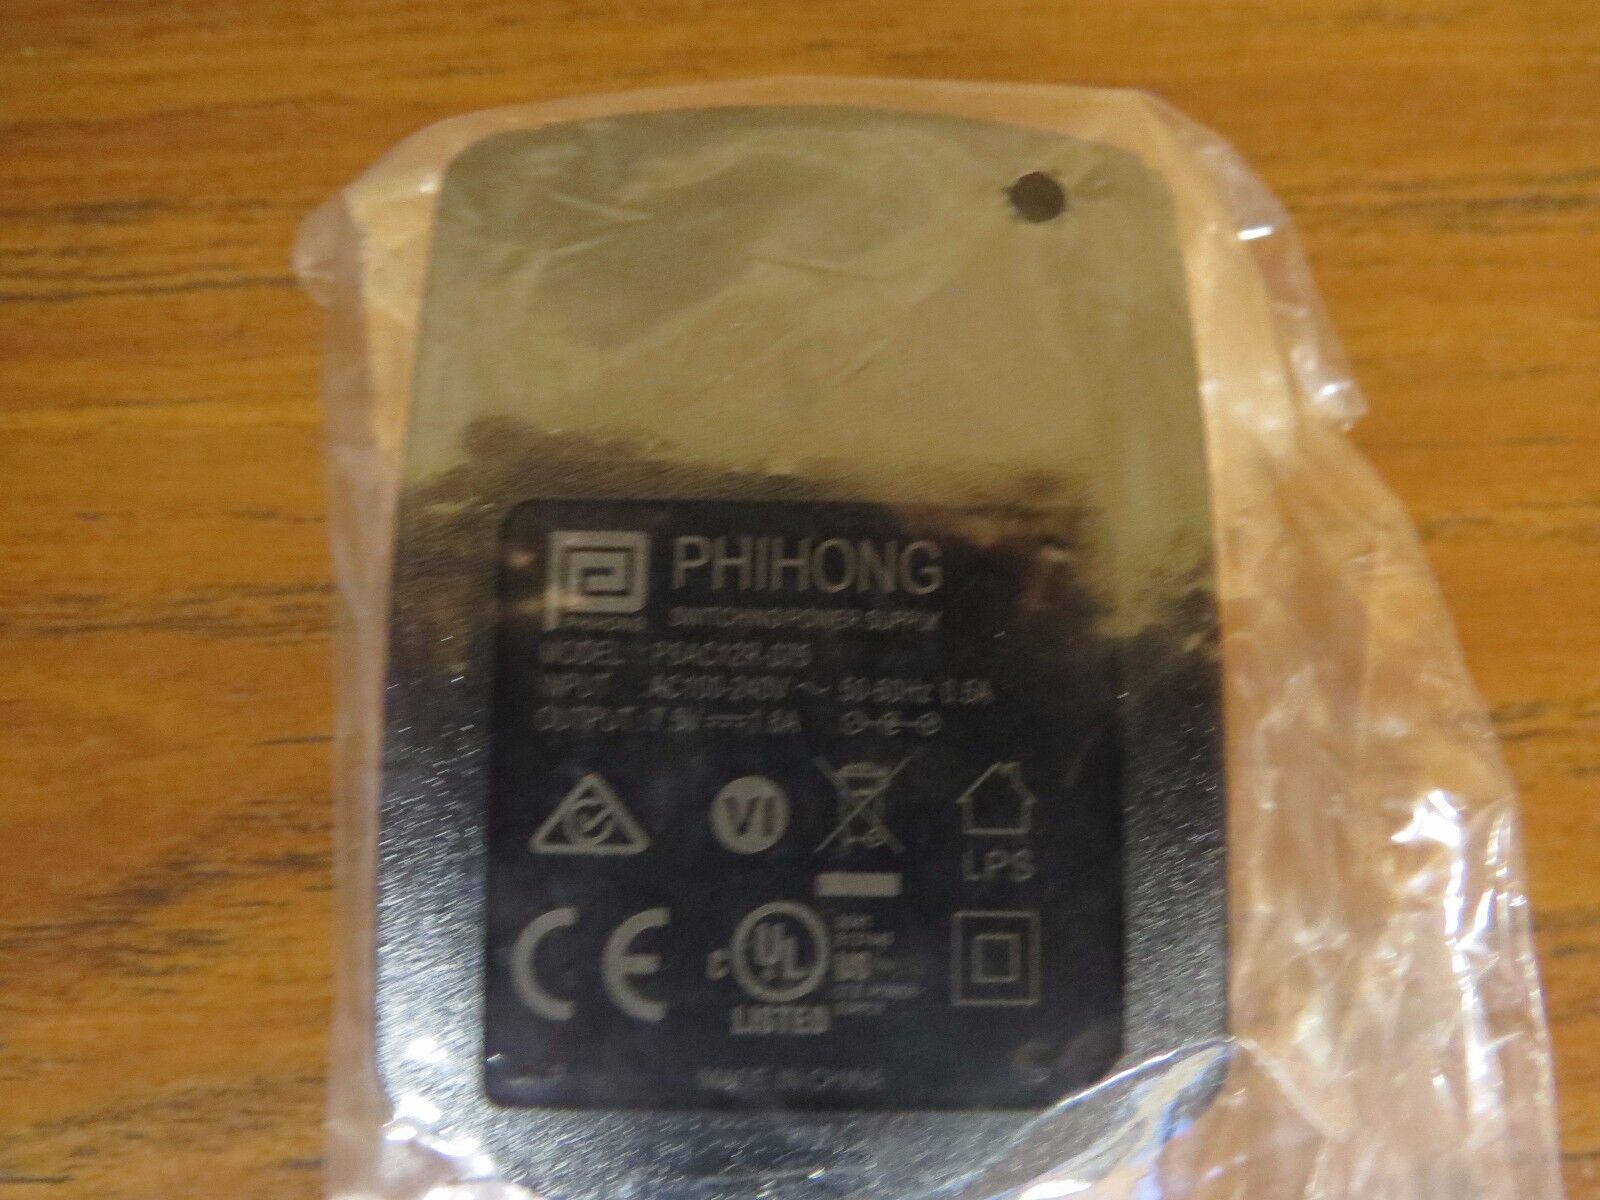 Phihong PSAC12R-075 7.5Volt 1.6Amp Watt Interchangeable Wall Adapter Type Adapter MPN PSAC12R-120-R Brand Phihong Phiho - Click Image to Close